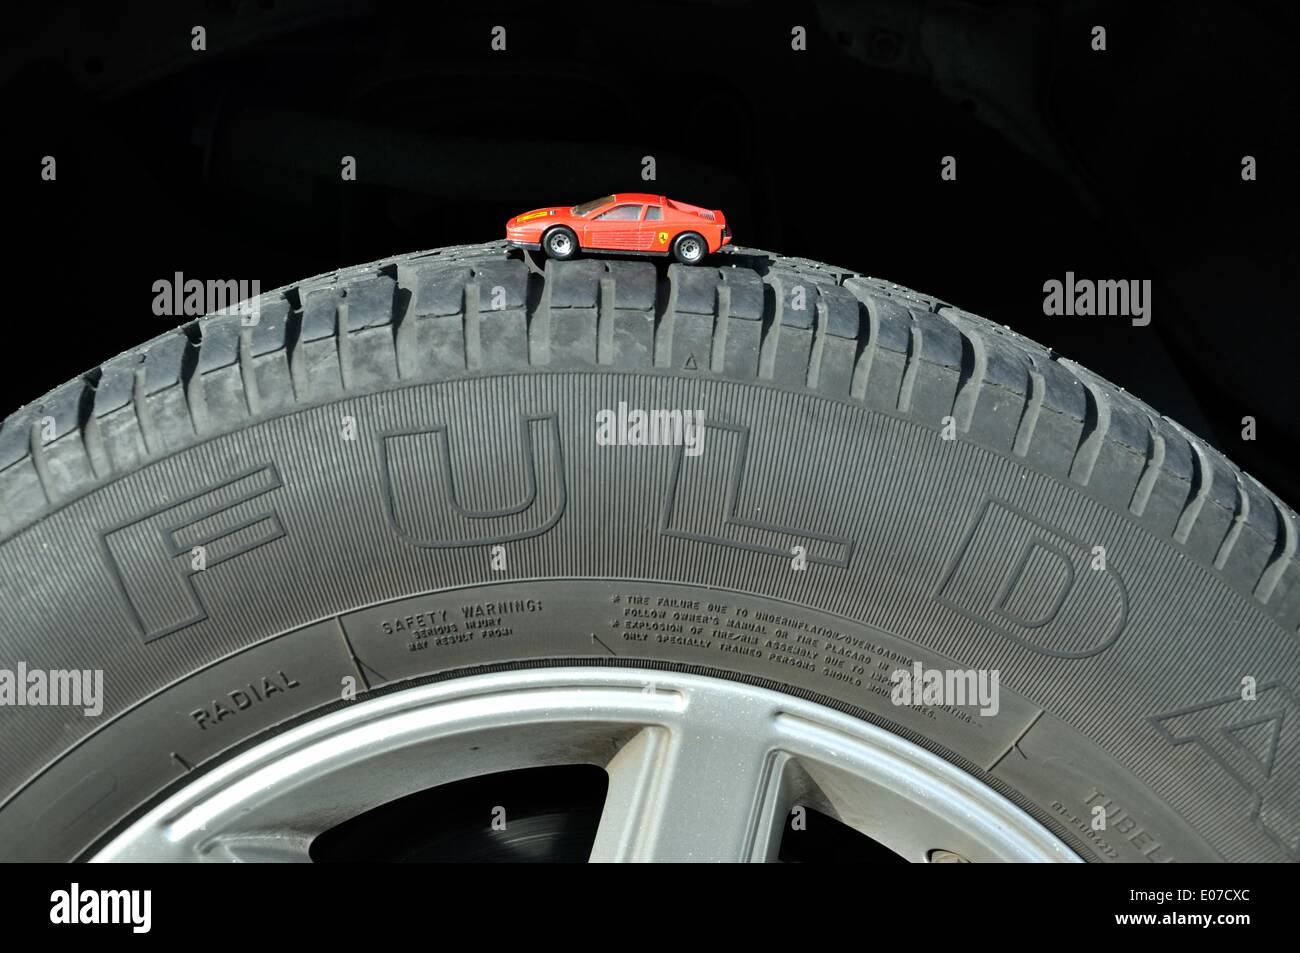 Illustration - A red Ferrari Matchbox car stands on a 'Fulda Reifen' tire in Germany, 08 October 2010. Photo: Berliner Verlag/Steinach - NO WIRE SERVICE Stock Photo